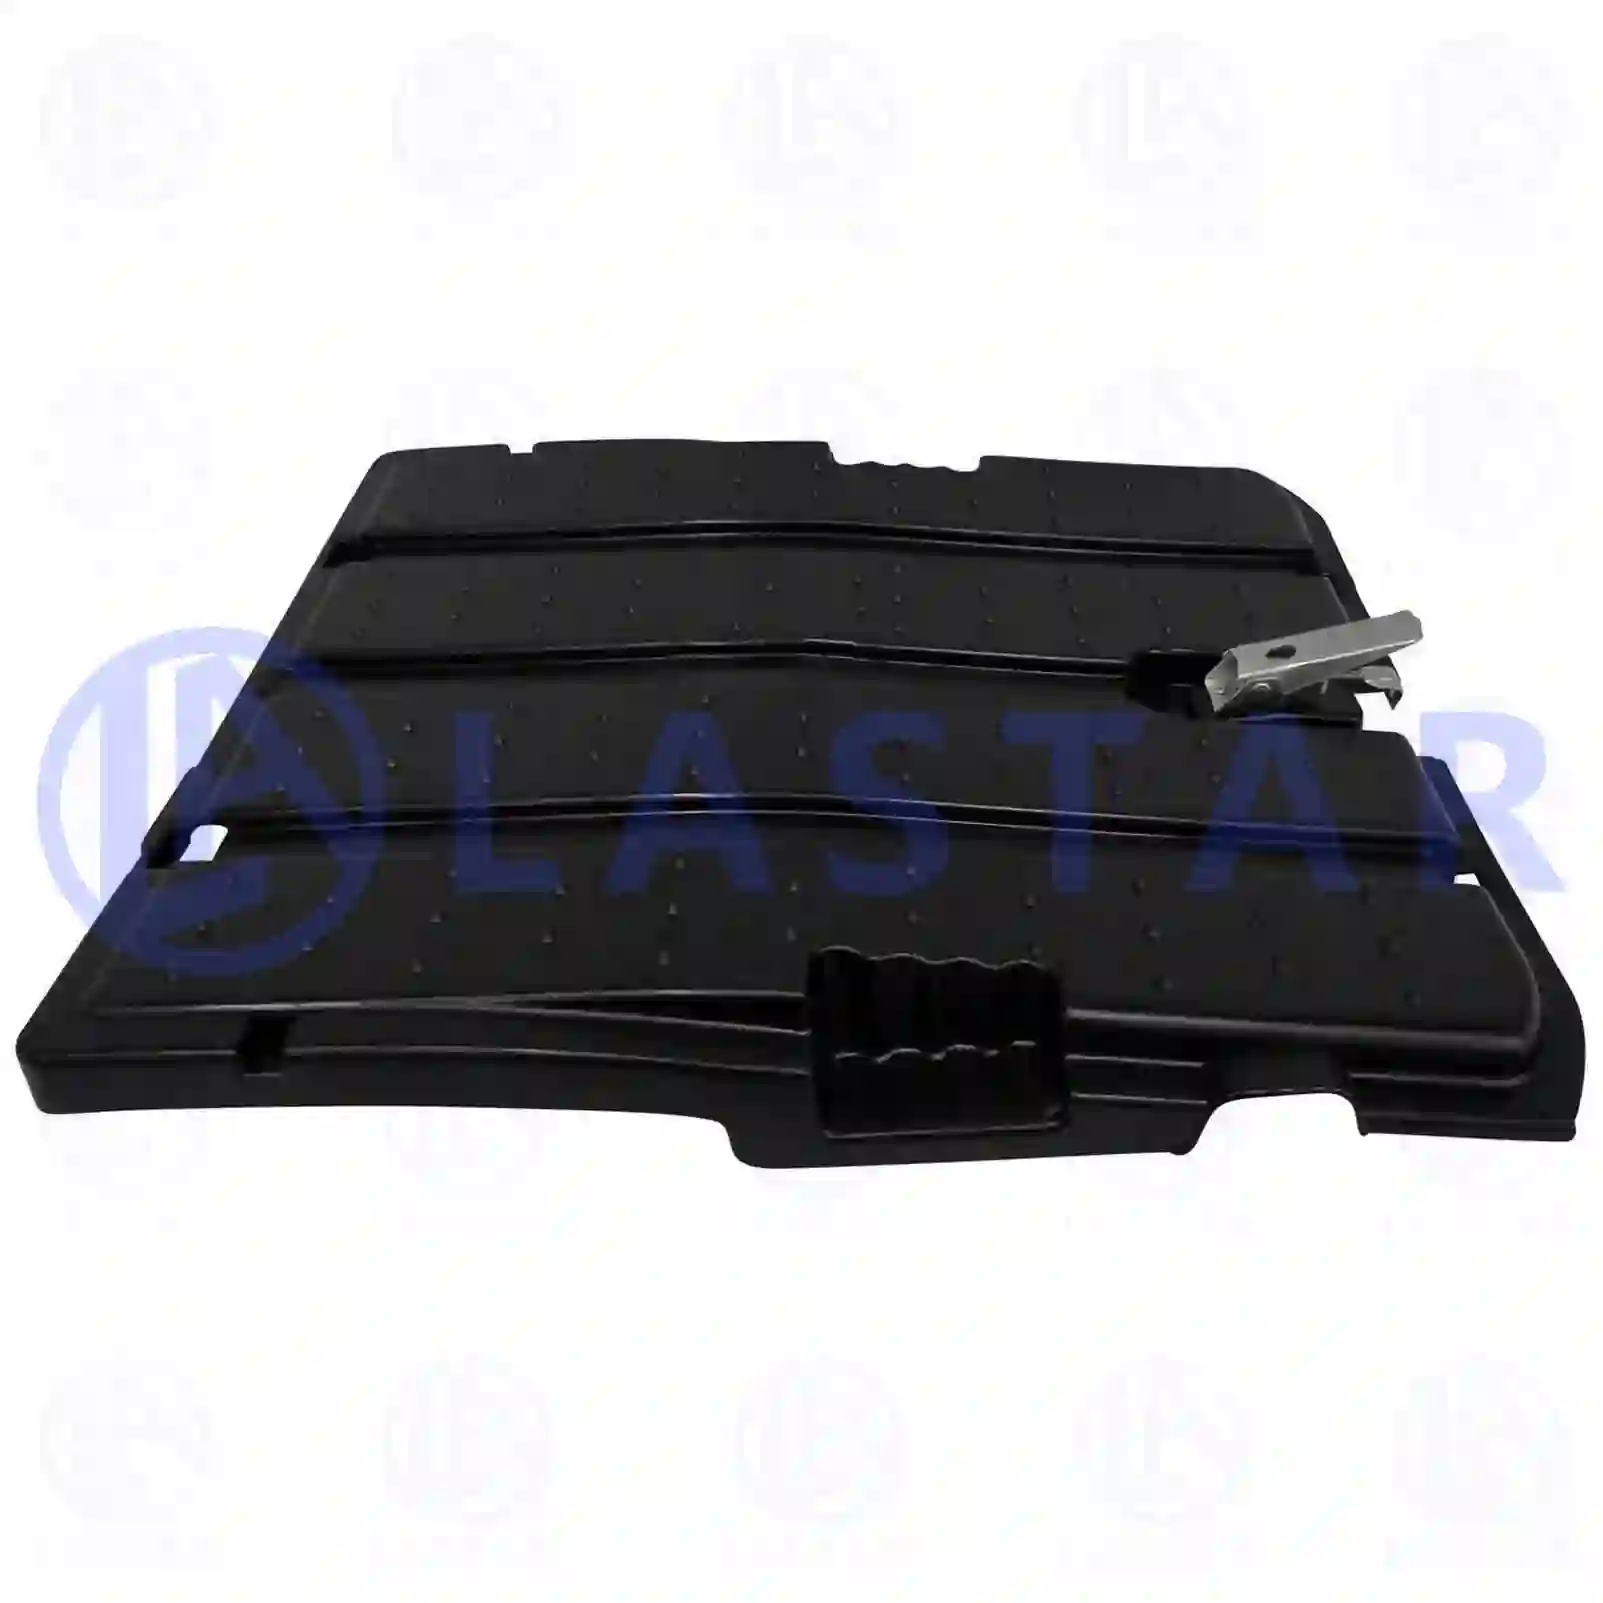 Battery cover, 77712207, 9304200065, 9304200165, 9604200344 ||  77712207 Lastar Spare Part | Truck Spare Parts, Auotomotive Spare Parts Battery cover, 77712207, 9304200065, 9304200165, 9604200344 ||  77712207 Lastar Spare Part | Truck Spare Parts, Auotomotive Spare Parts